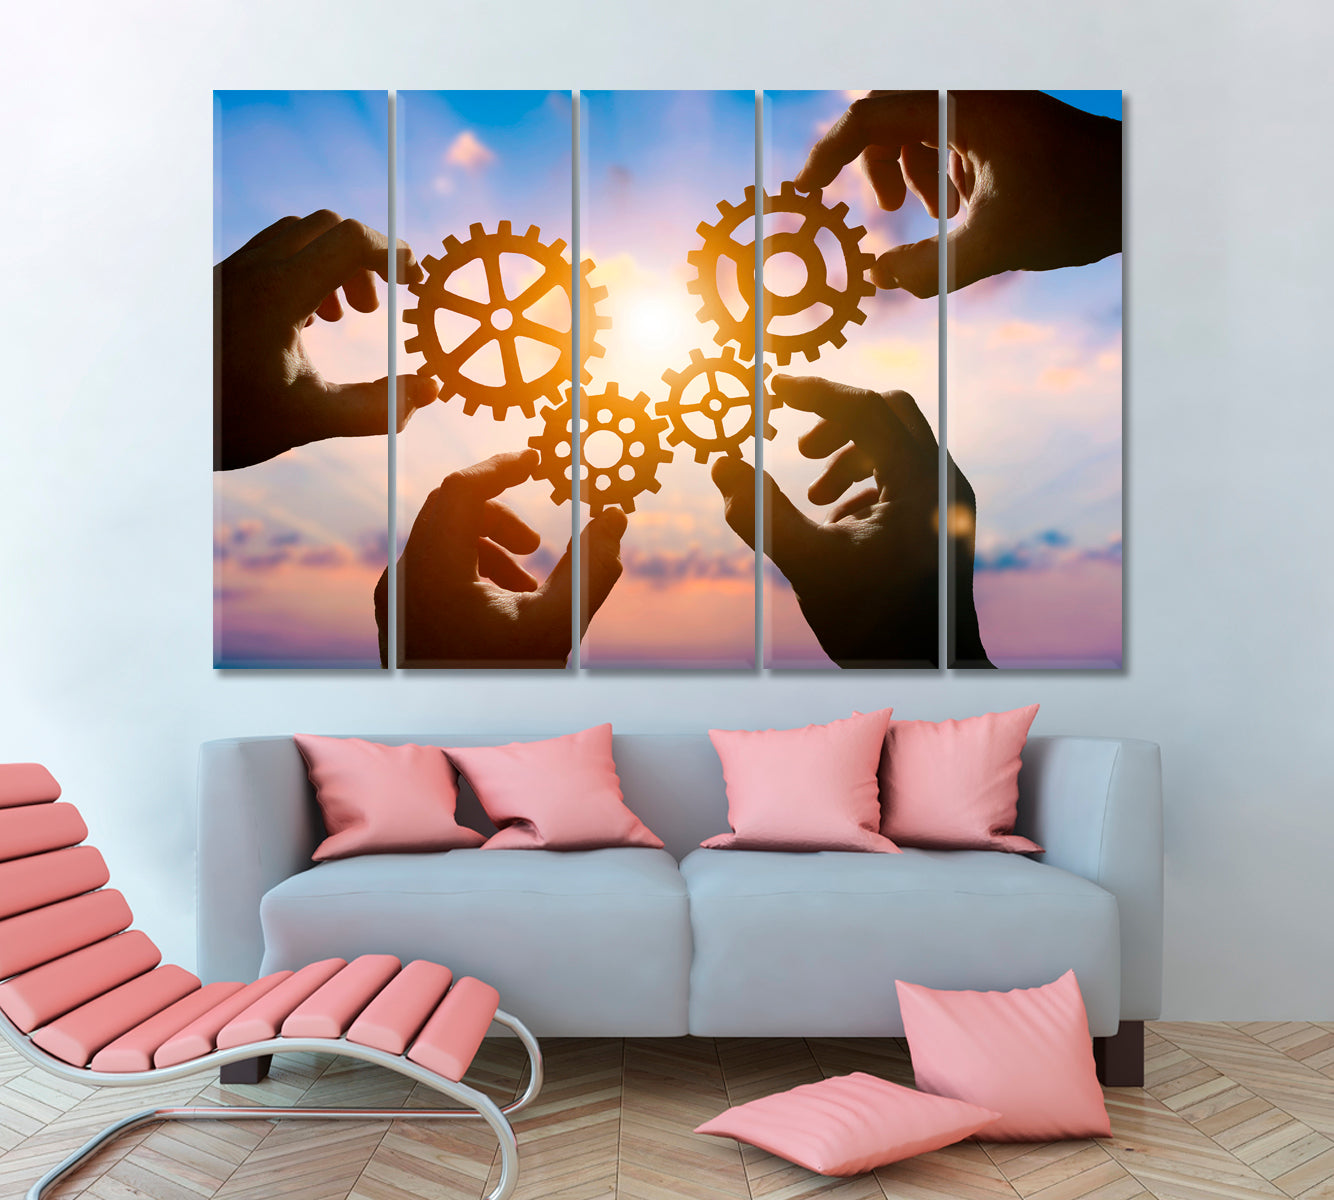 PART OF THE WHOLE Gear Wheels Solar Rays Business Concept Poster Office Wall Art Canvas Print Artesty   